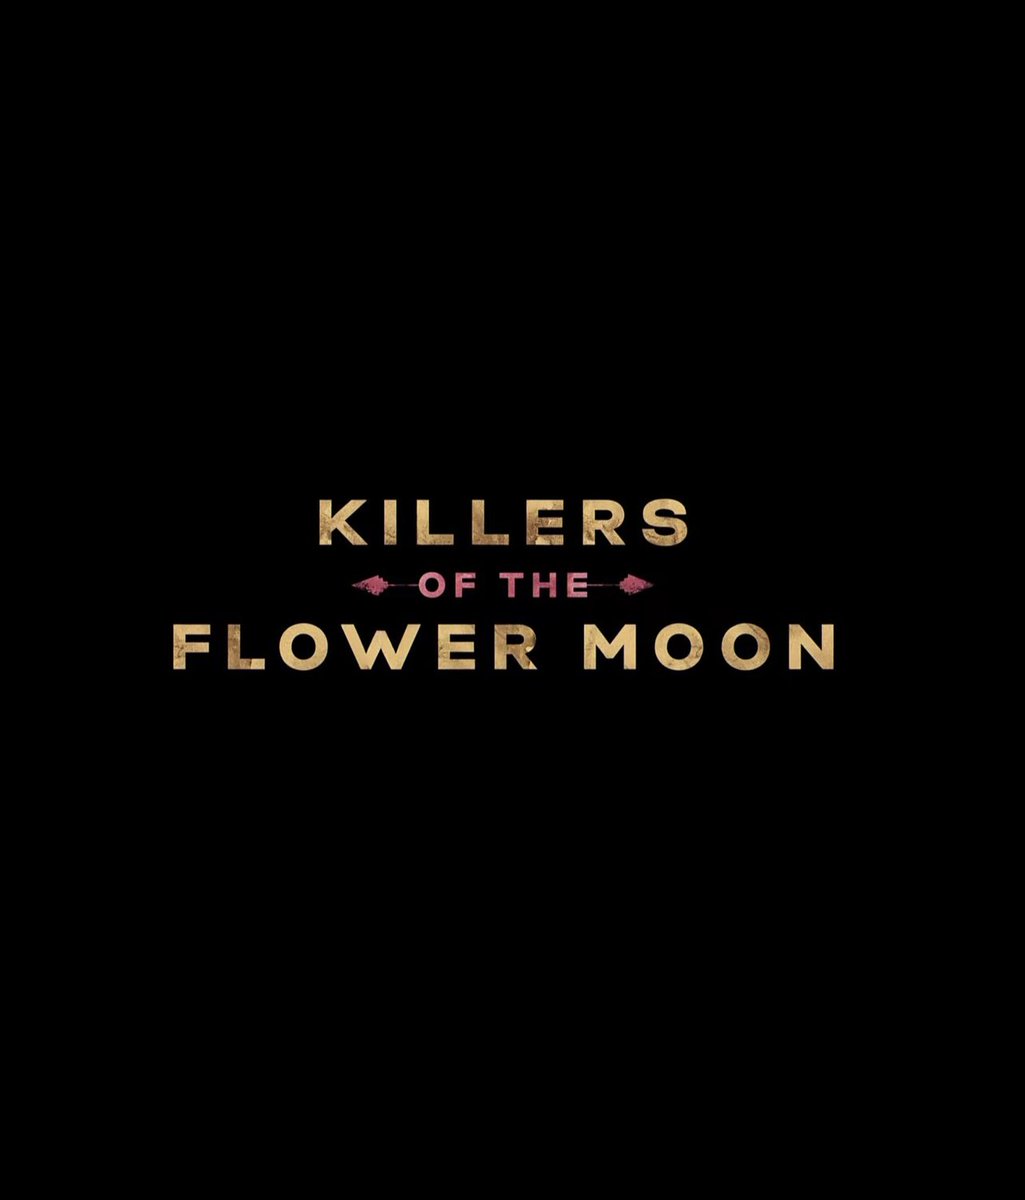 Paramount has deleted their post about Robert De Niro’s #KillersOfTheFlowerMoon character, who murdered Osage tribe members 

“You know he had to do it em 😎”